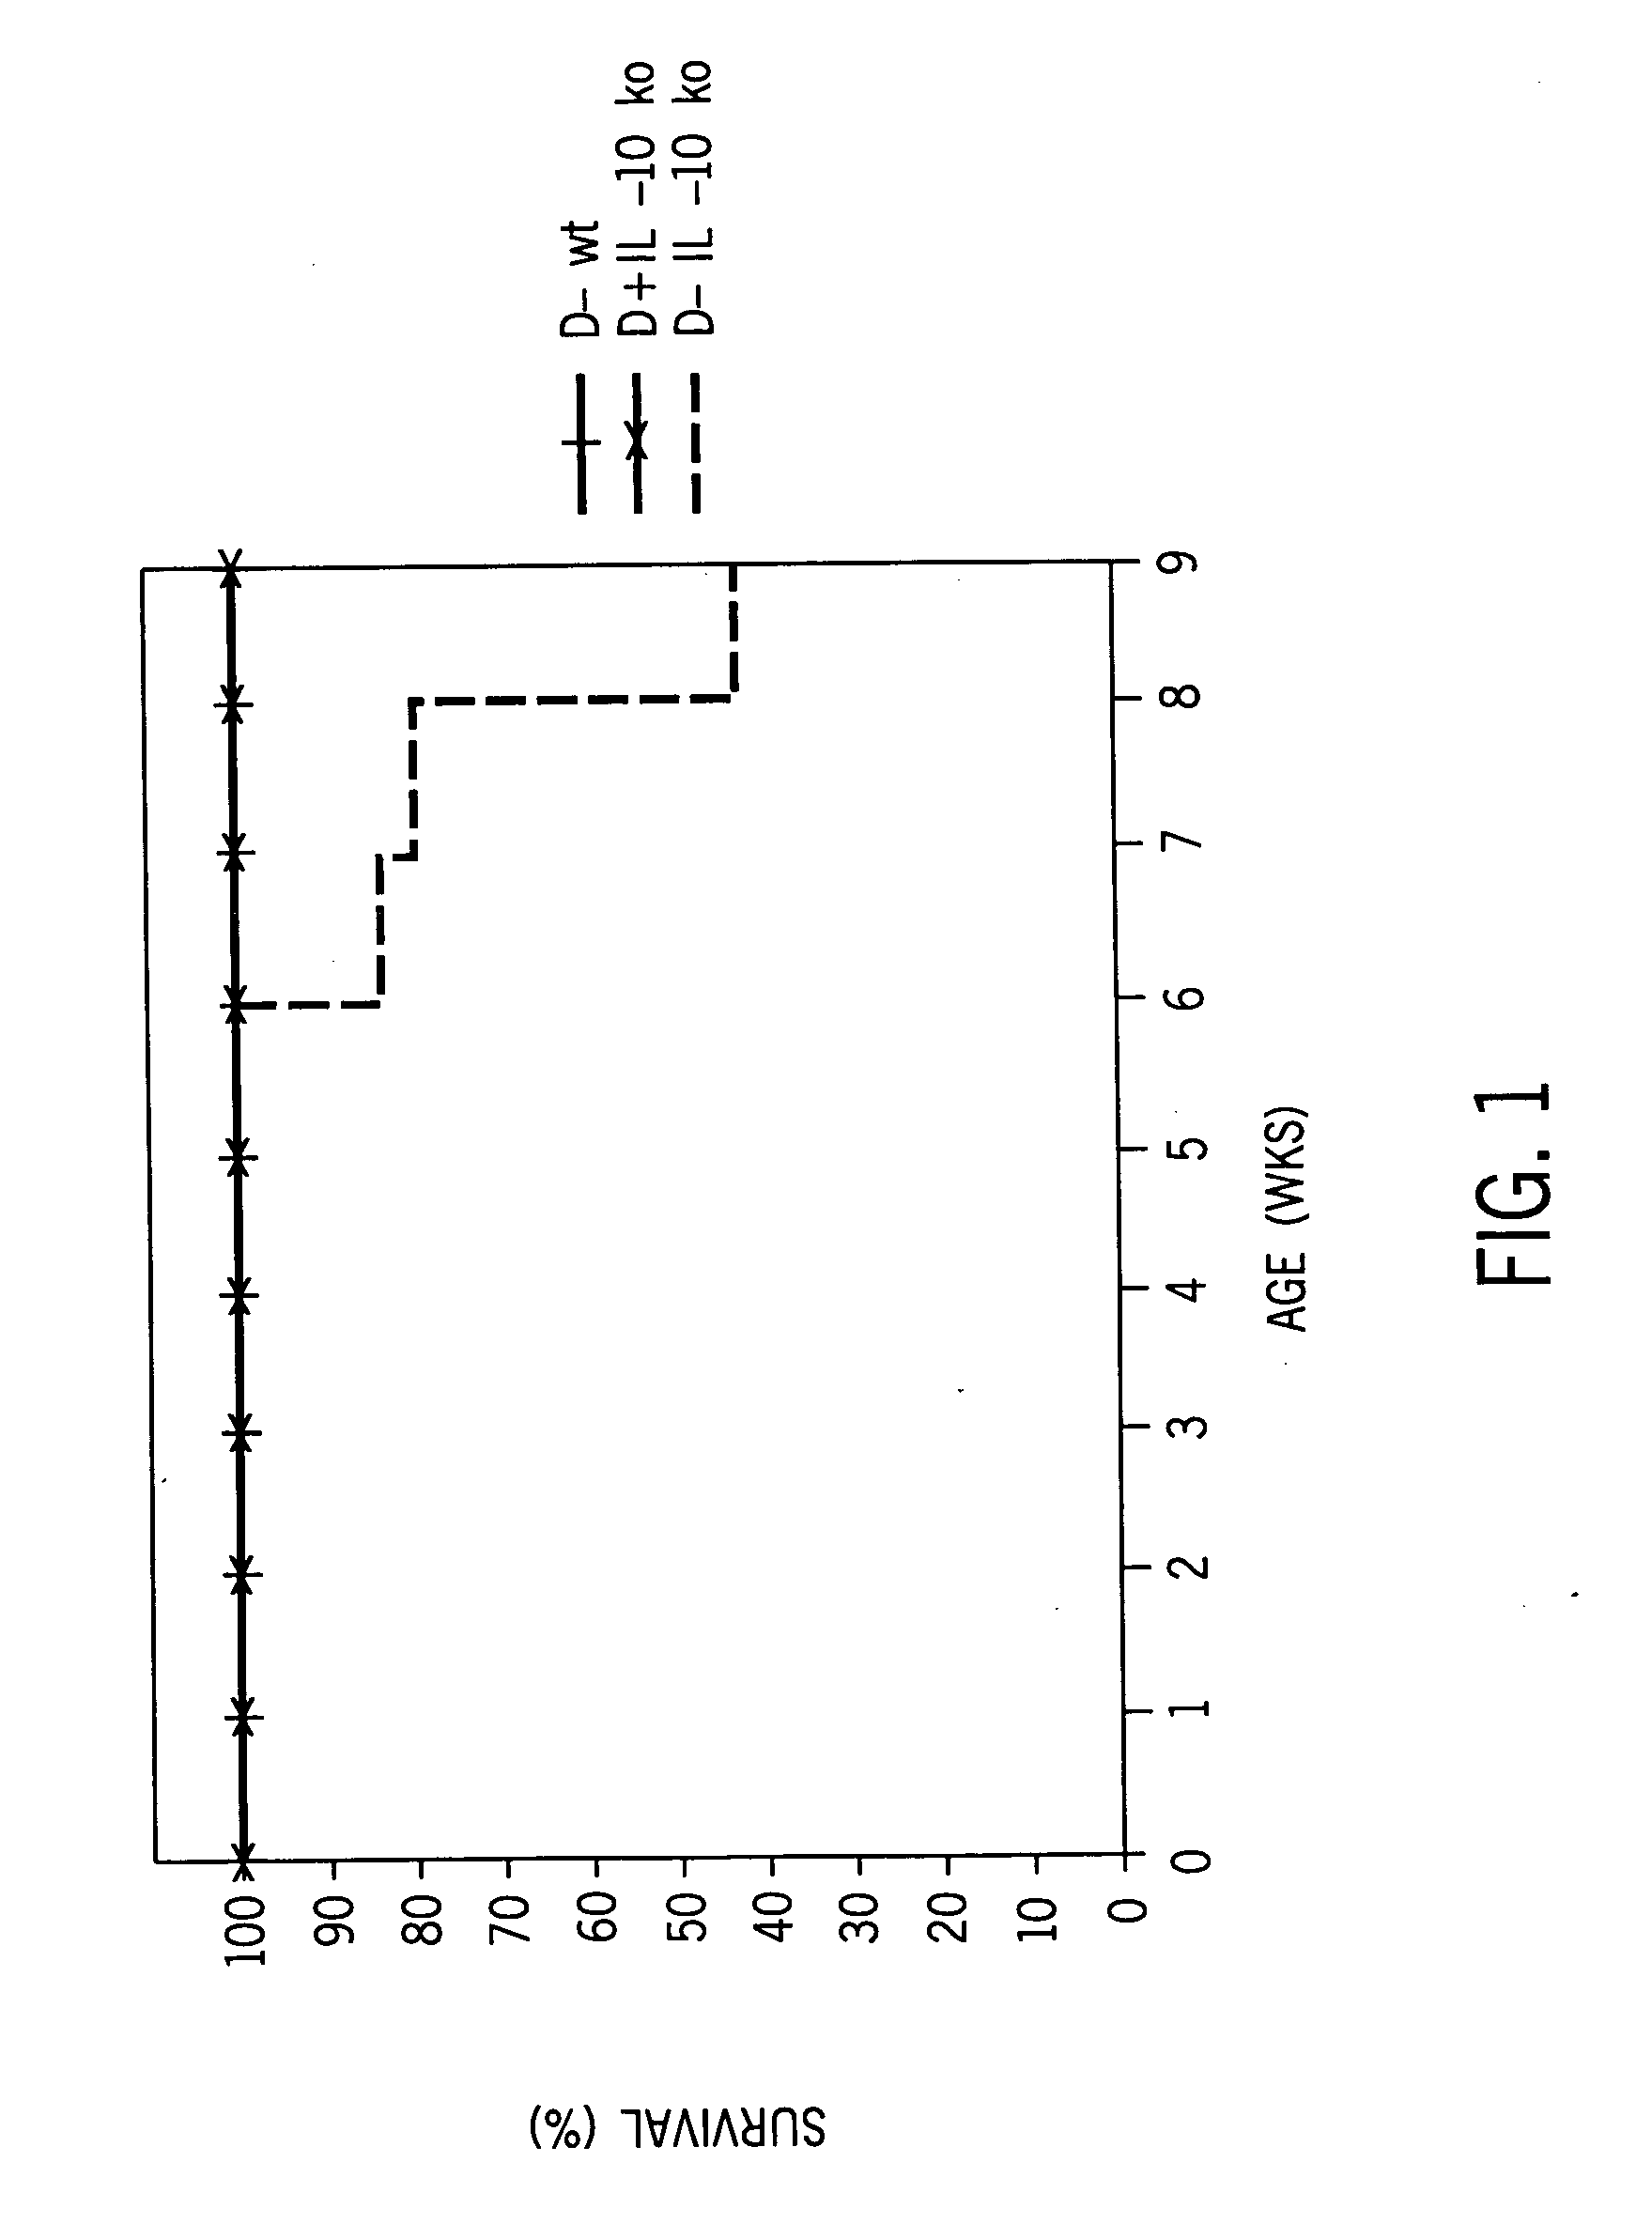 Treatment of inflammatory bowel disease with vitamin D compounds